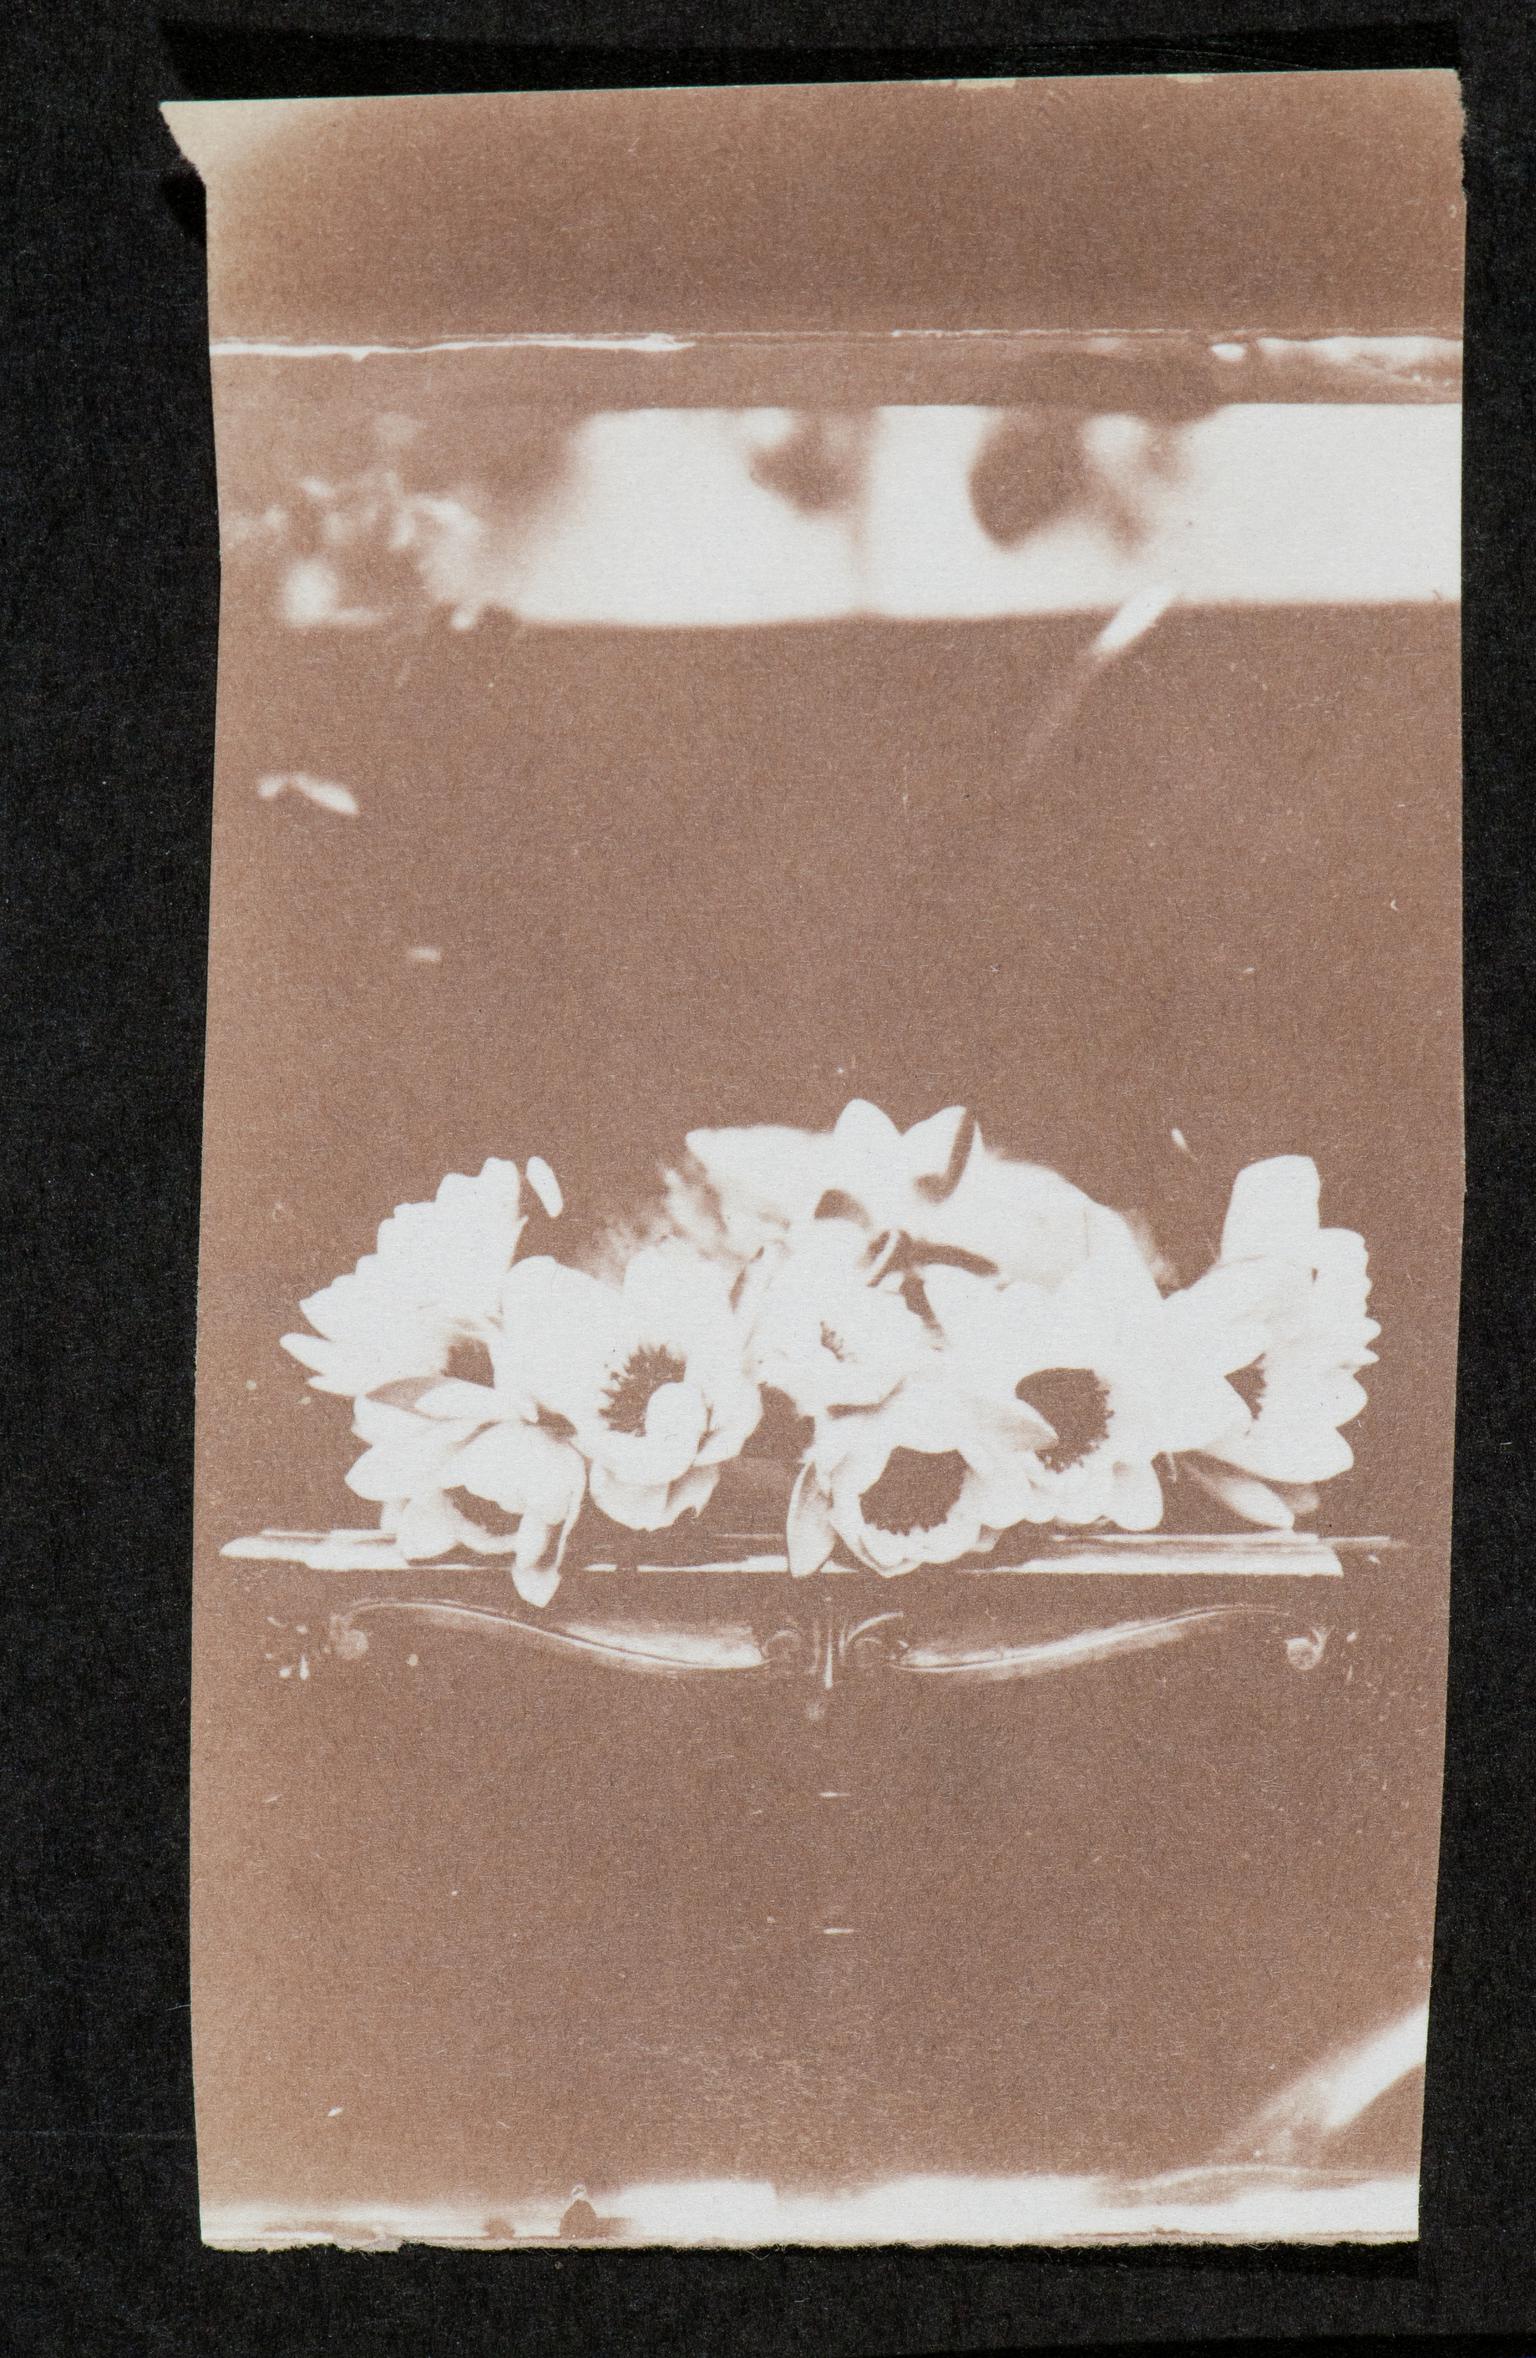 Water lilies, photograph